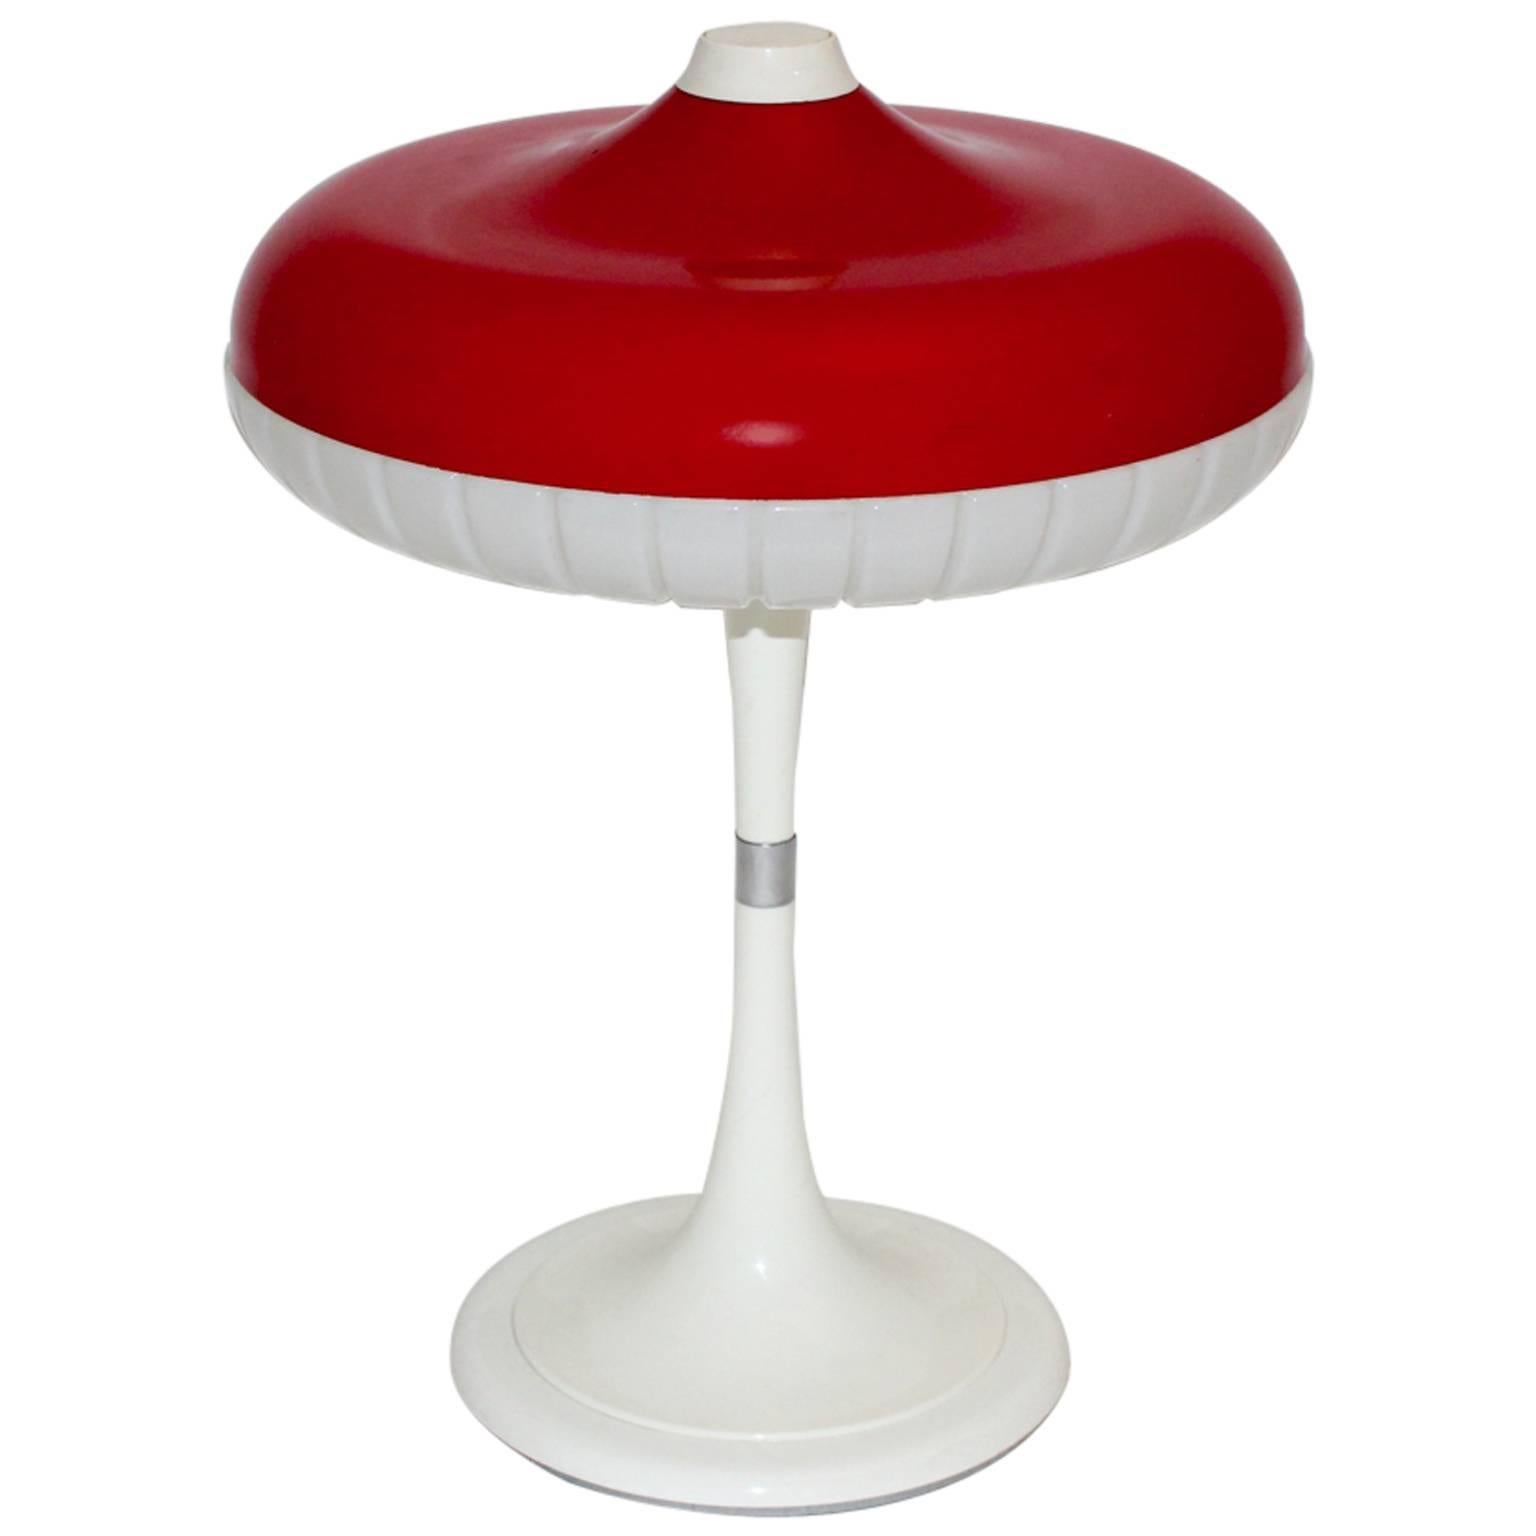 Space Age Red Vintage Mushroom Table Lamp Siform by Siemens Germany, 1960s For Sale